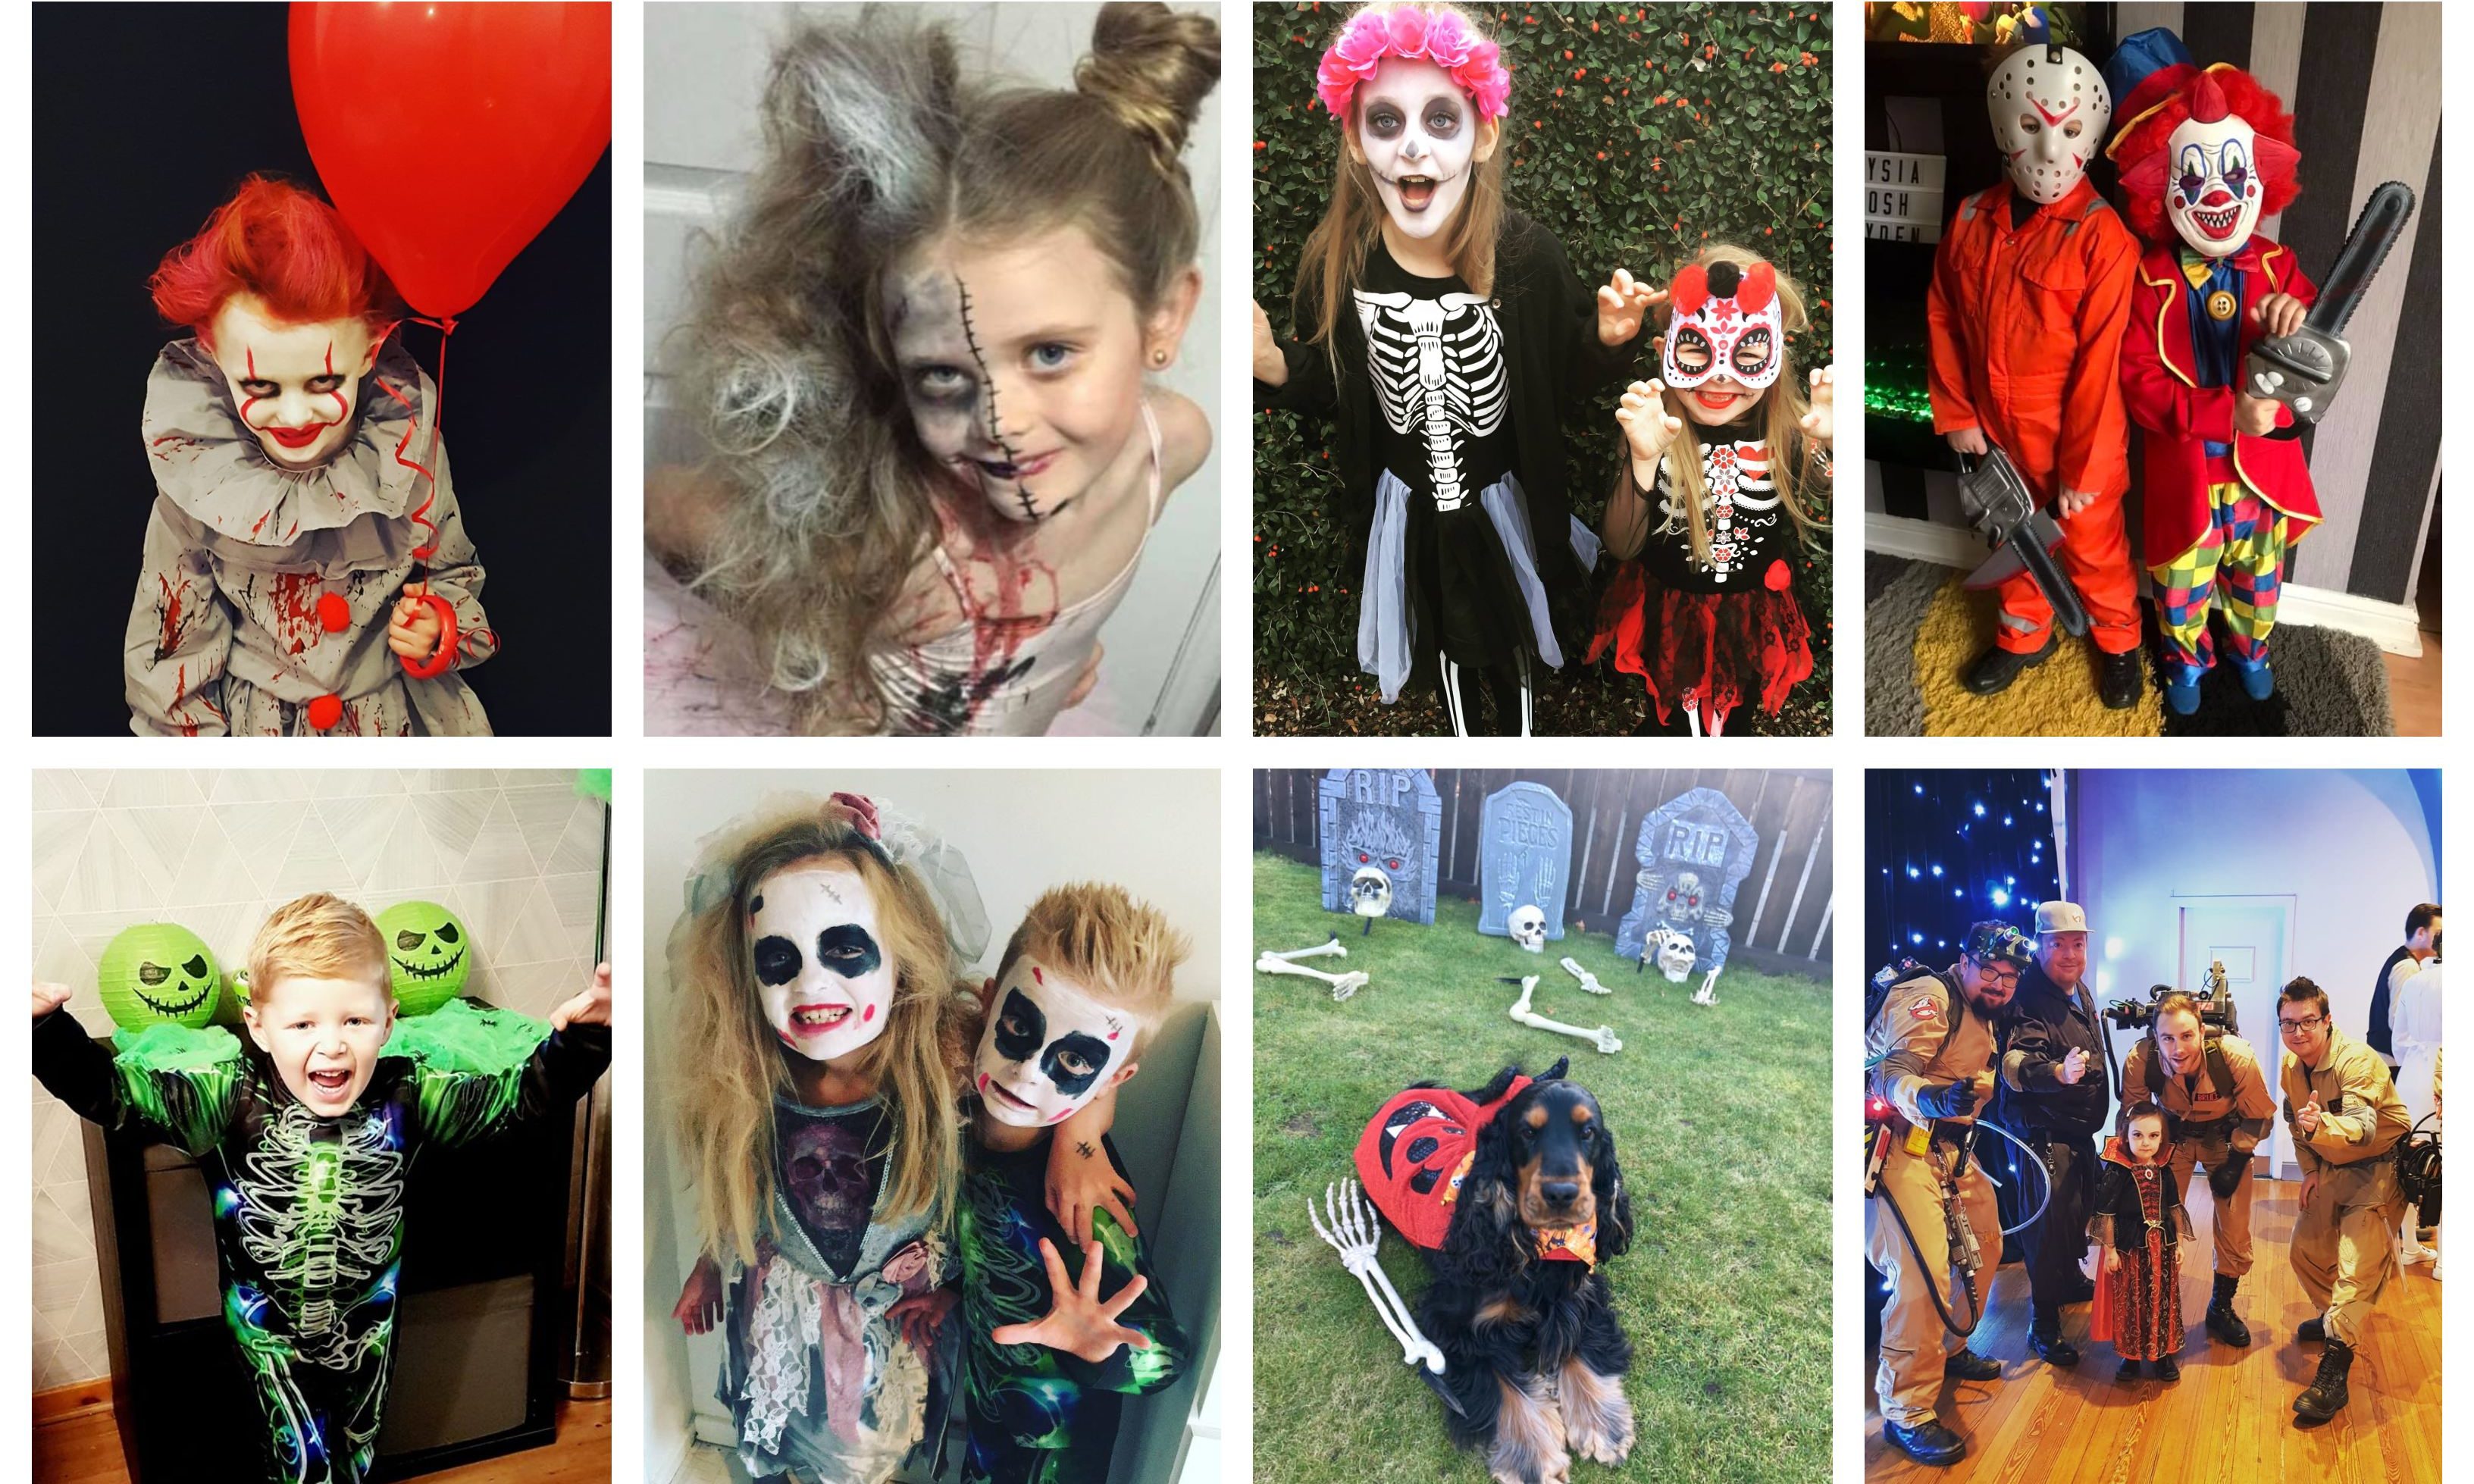 A few of the Halloween photos sent in to us by Courier readers.